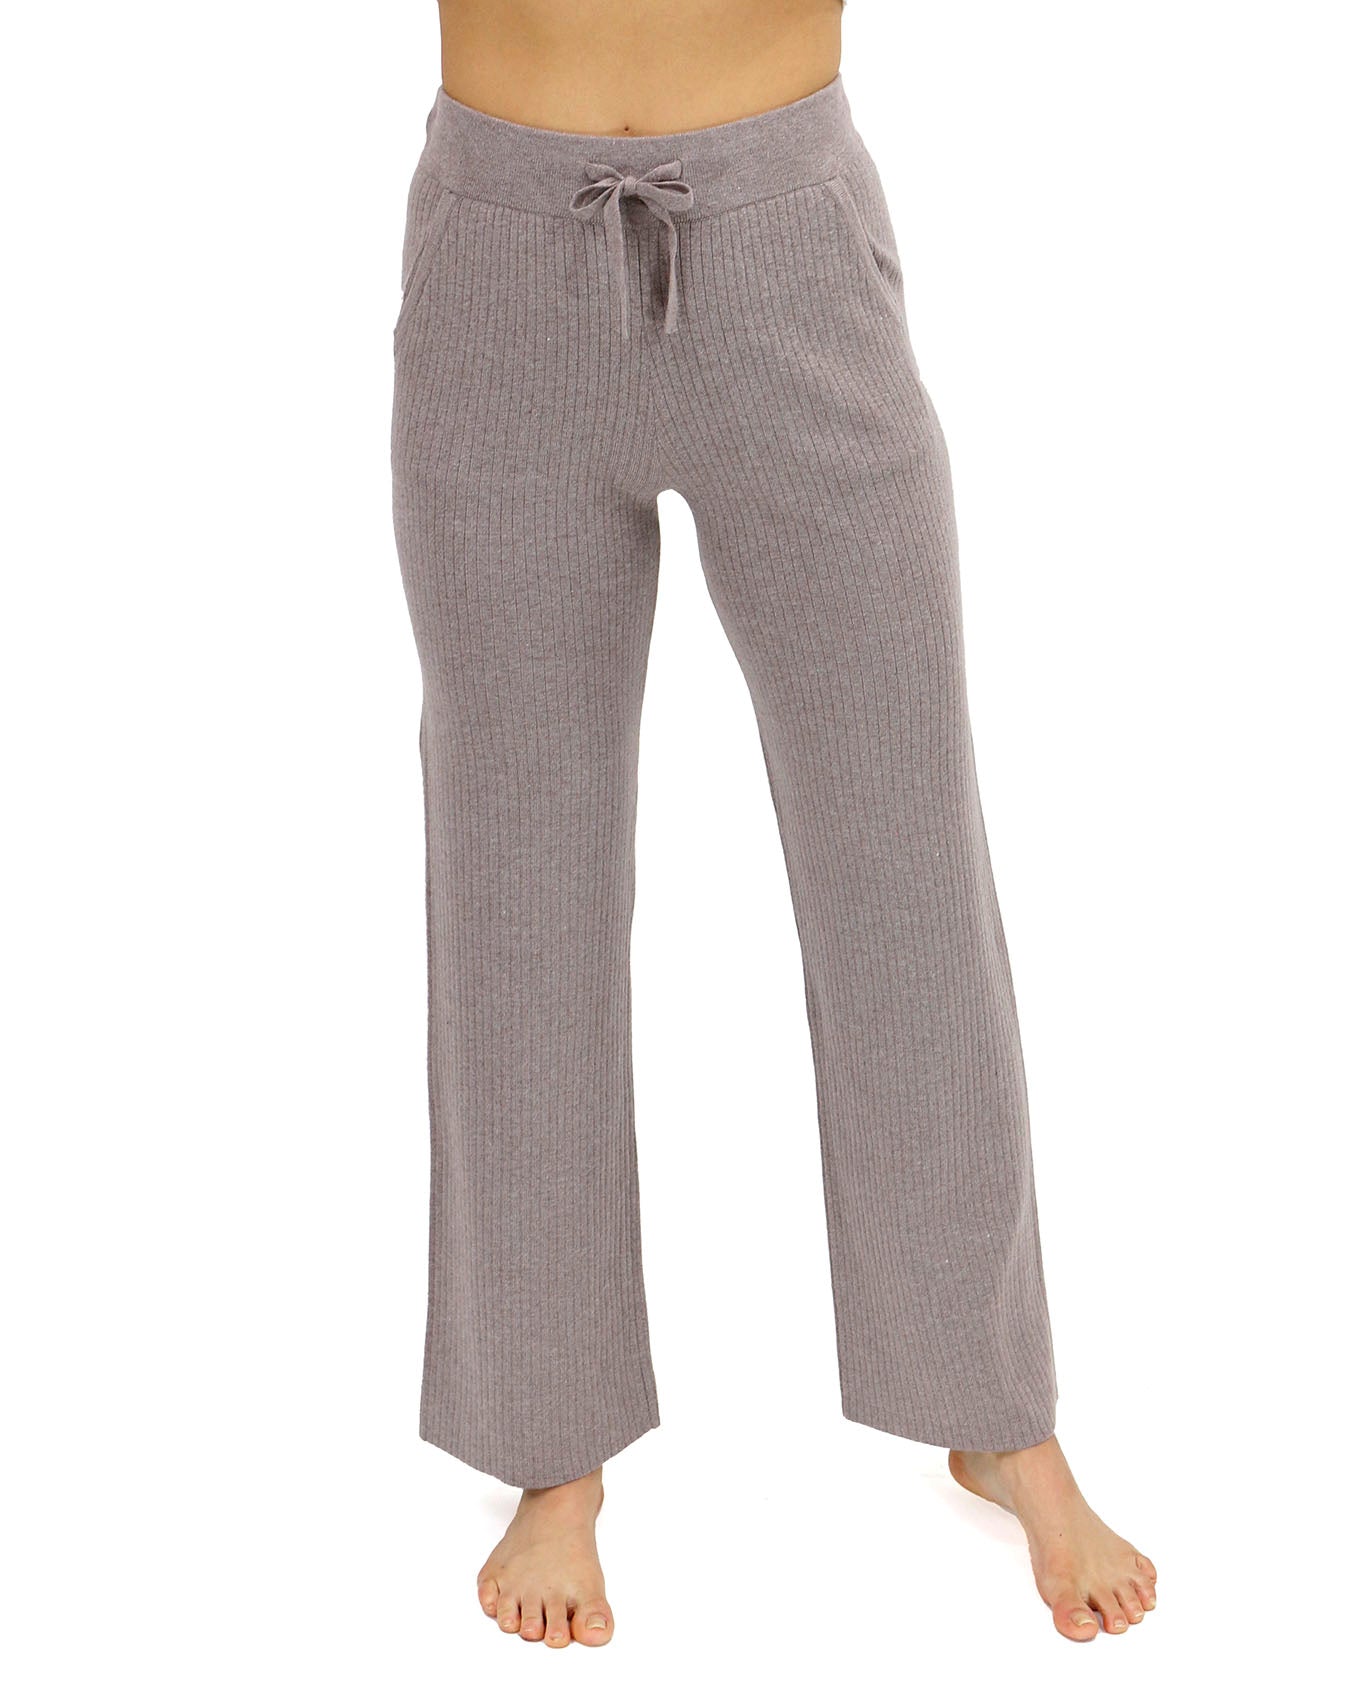 Grey Comfy Ribbed Elasticated Trousers - Want That Trend